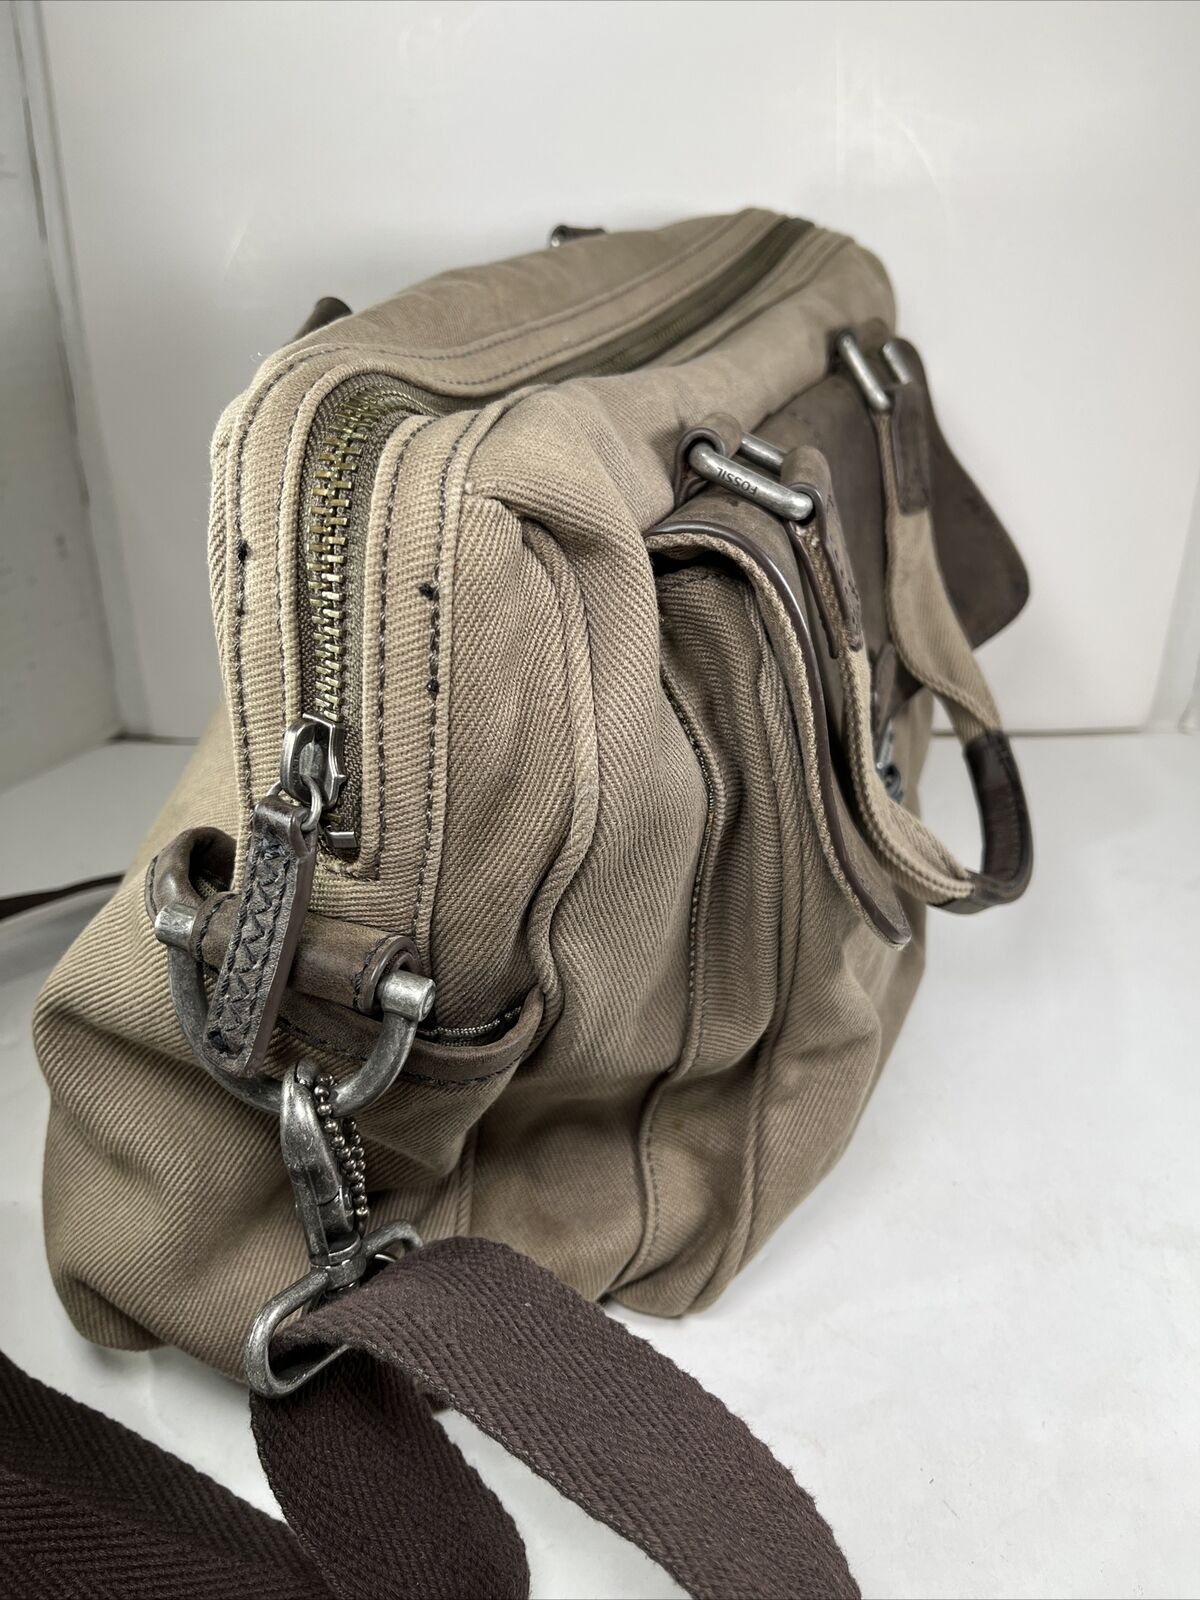 Fossil Beige Canvas with Brown Leather Laptop Bag - image 8